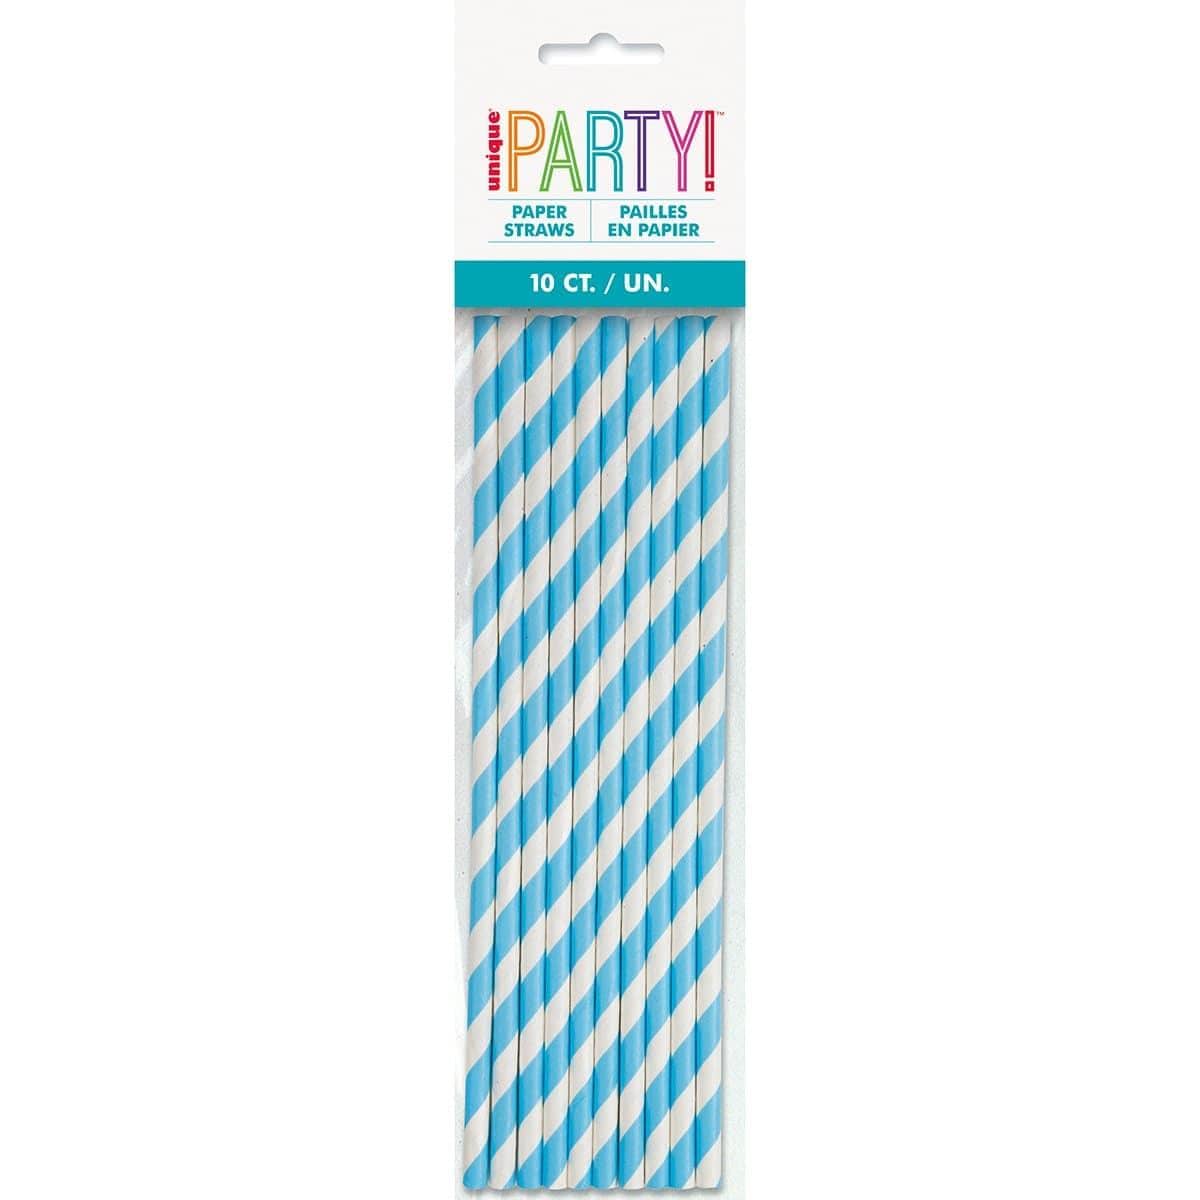 Buy Plasticware Paper Straw With Stripes 10/pkg - Light Blue sold at Party Expert